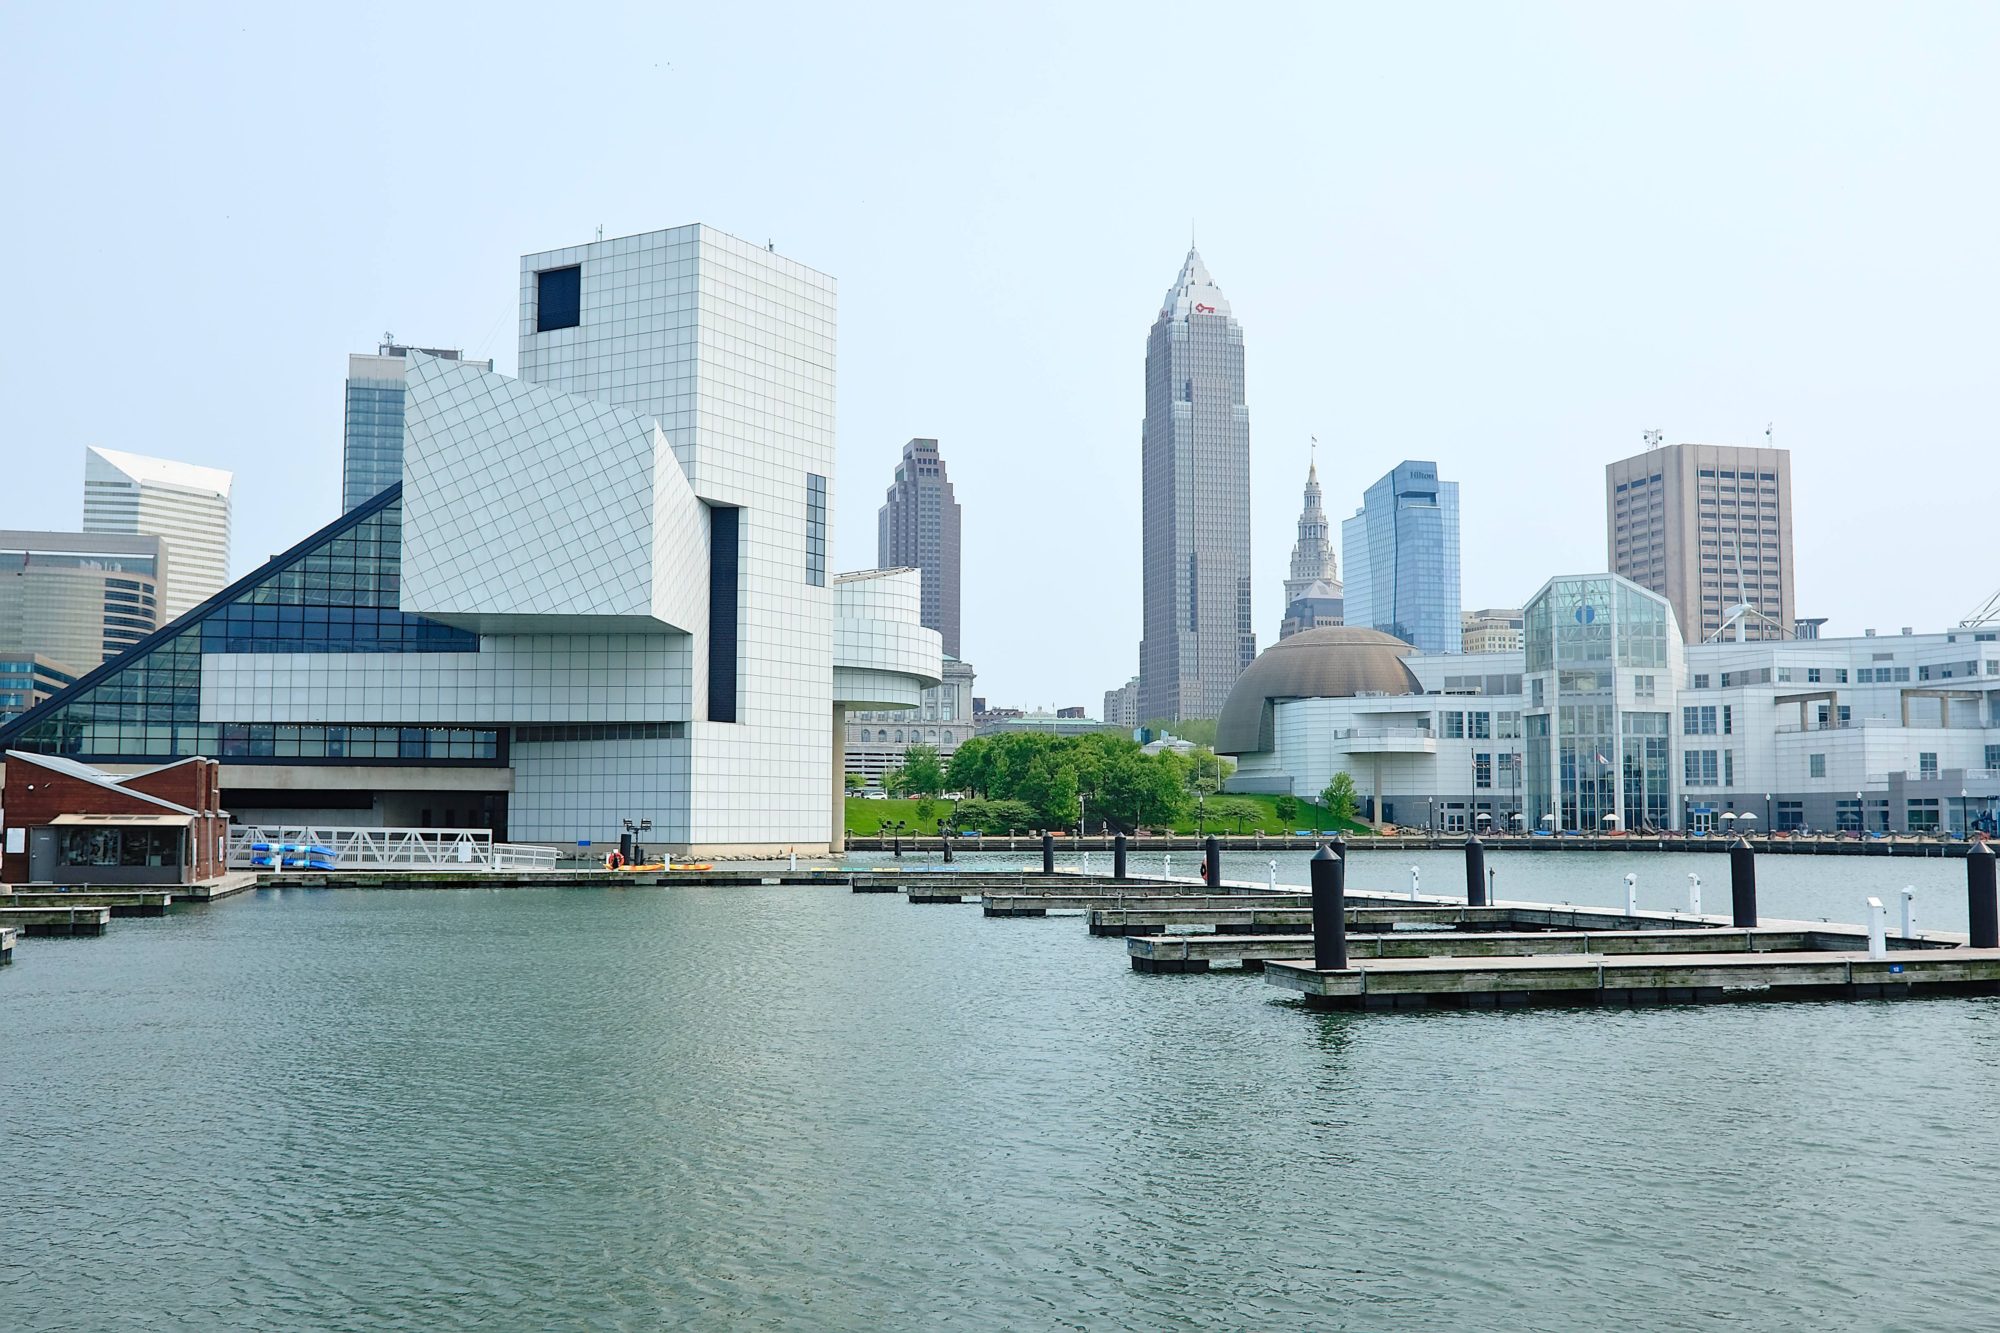 The Cleveland skyline seen from the harbor